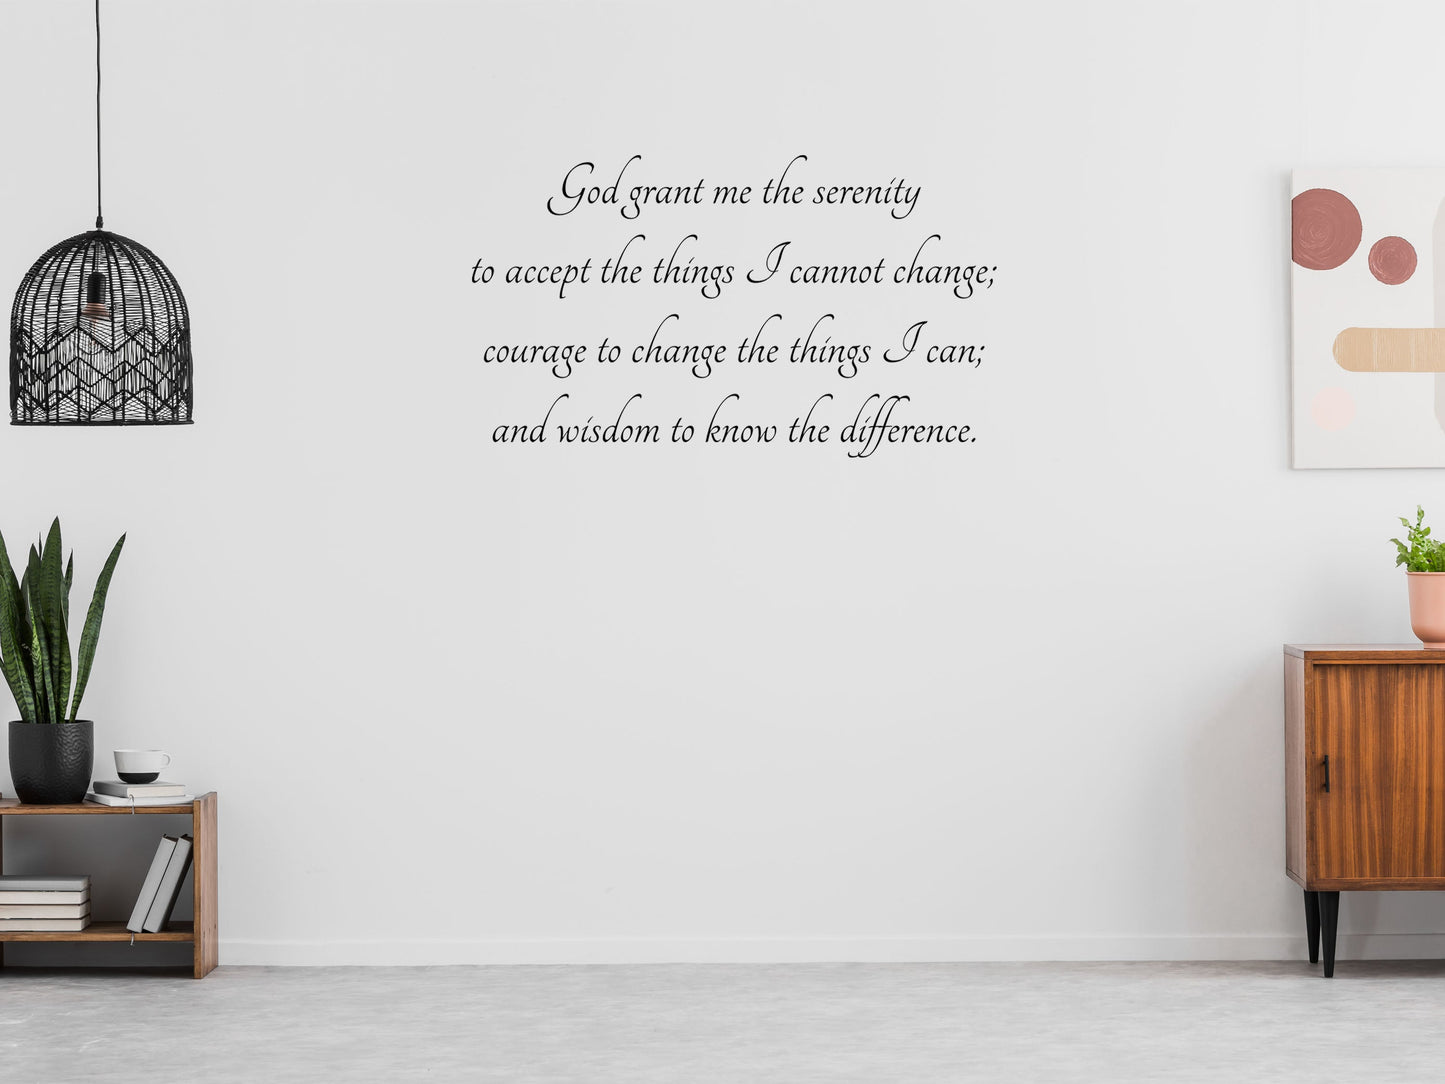 The Serenity Prayer Vinyl Wall Decal Inspirational Wall Signs 